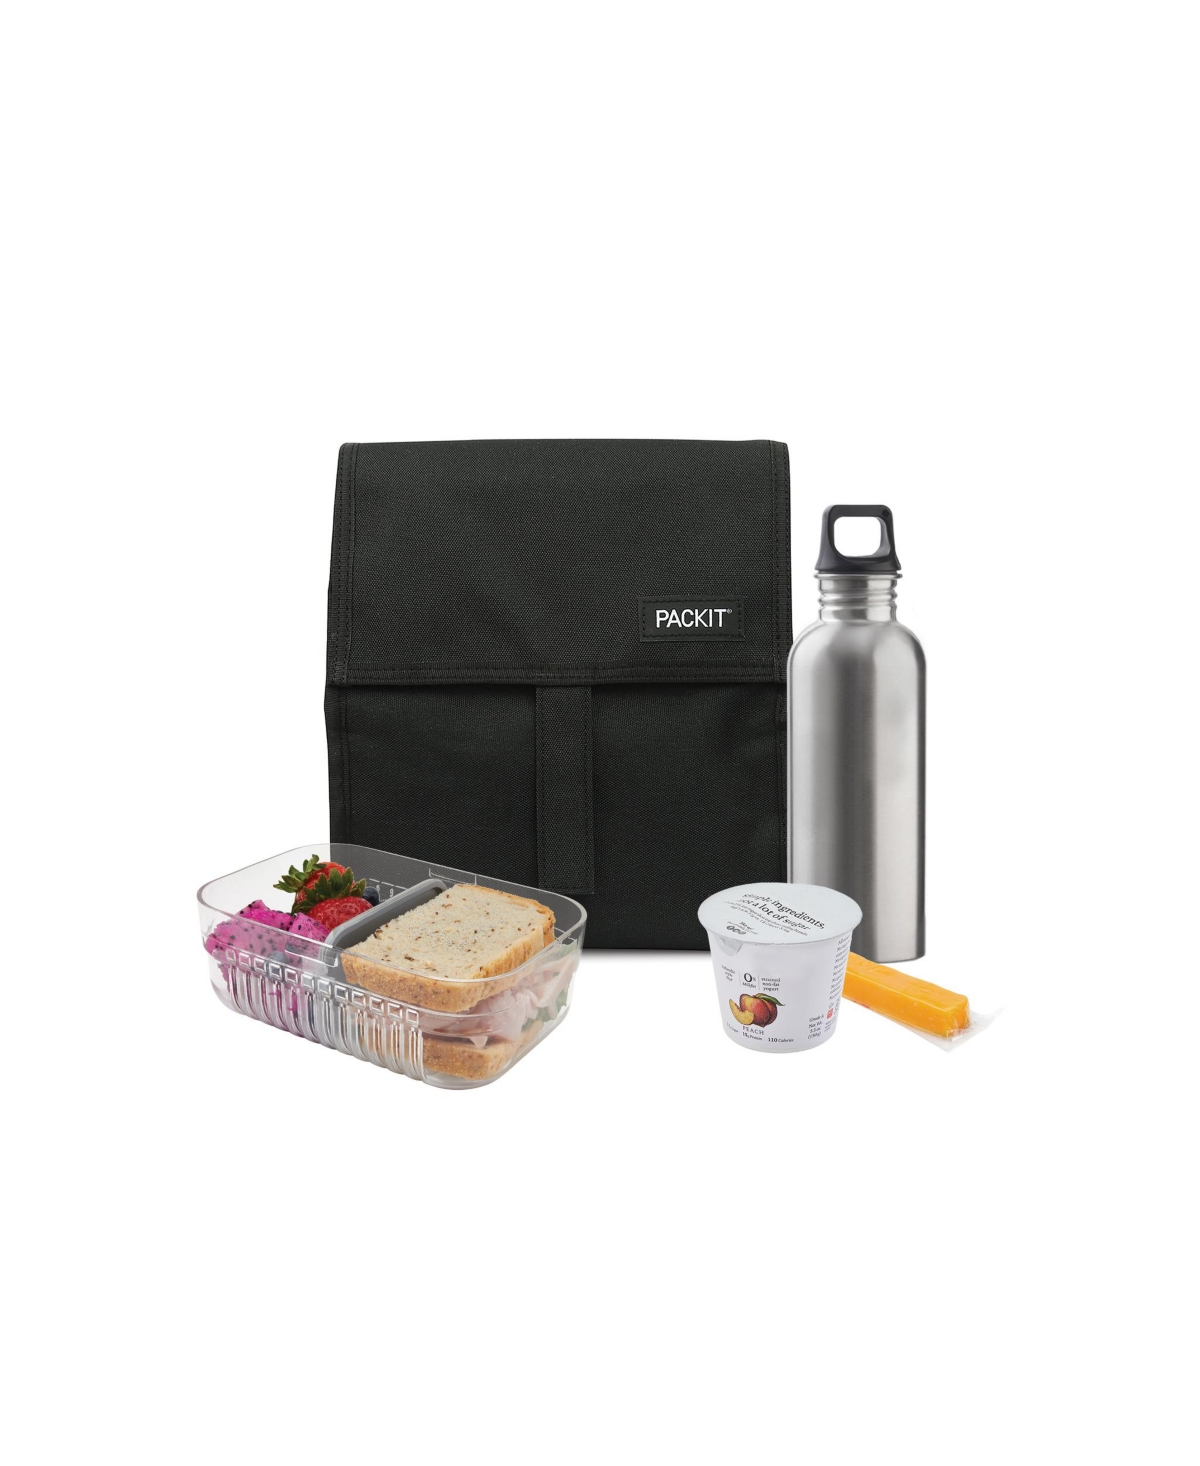 Pack It Freezable Lunch Bag And Mod Lunch Bento Set, 5 Piece In Black And Gray